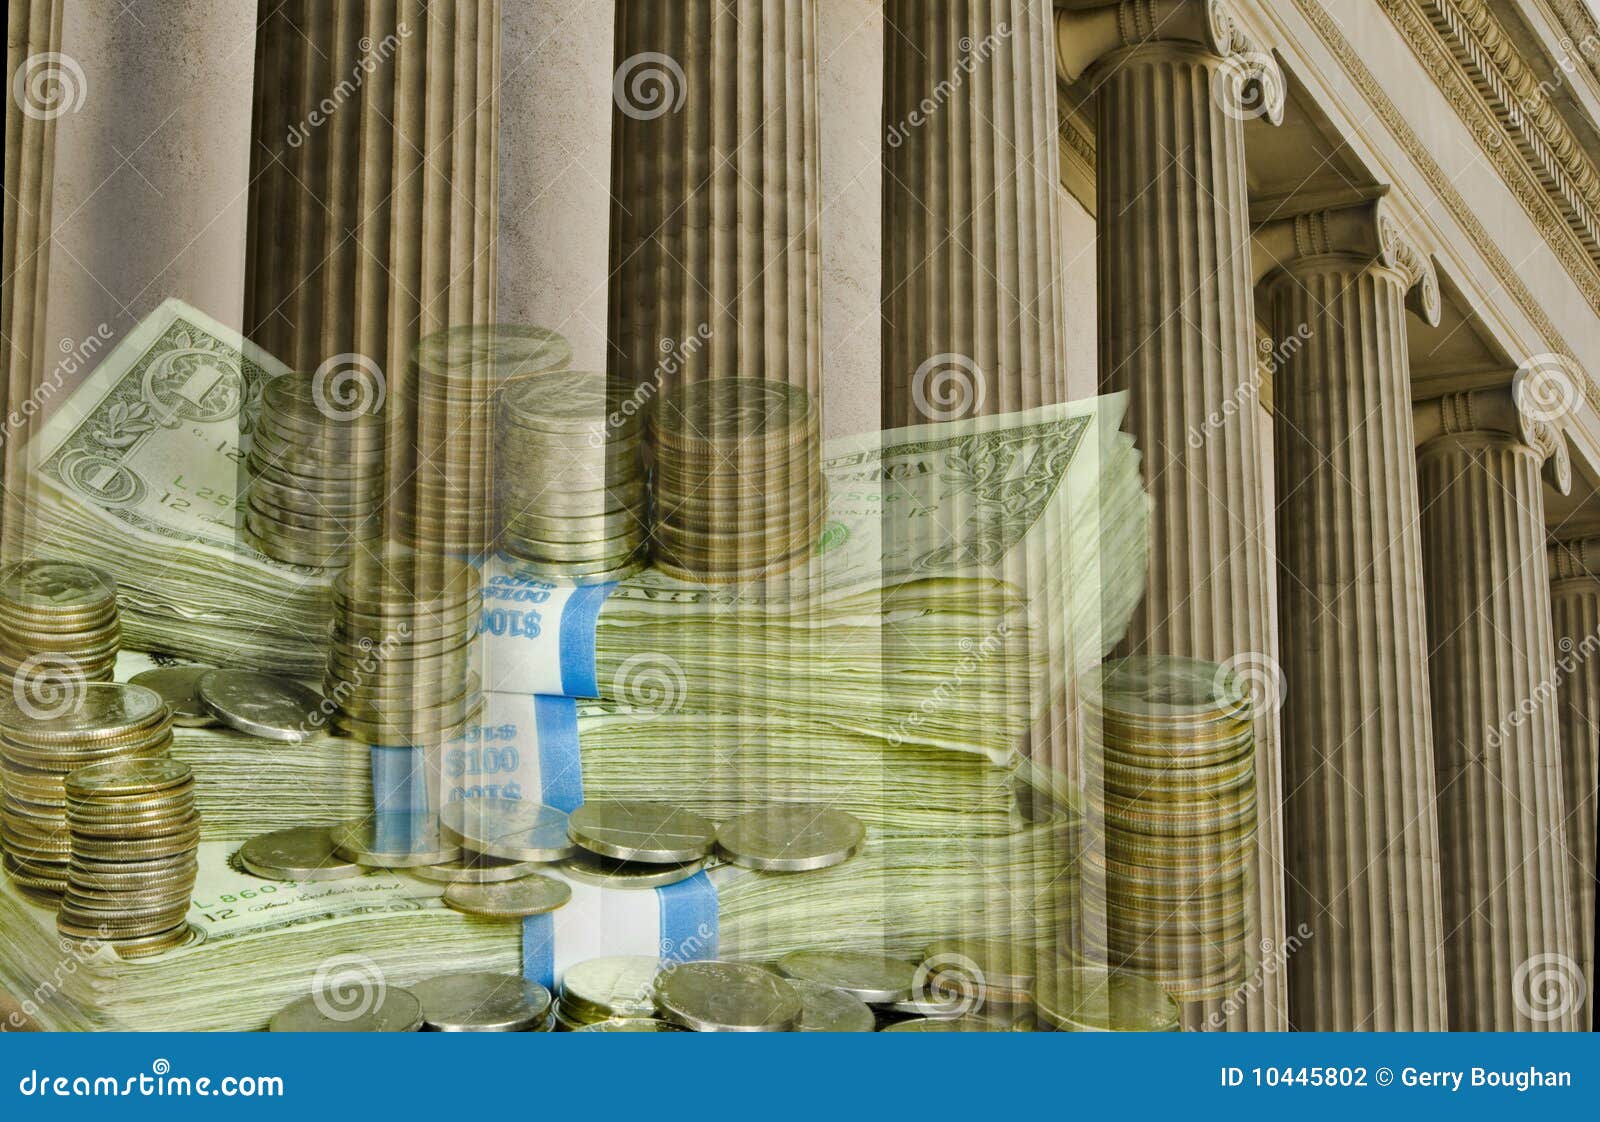 financial institution with u.s. currency